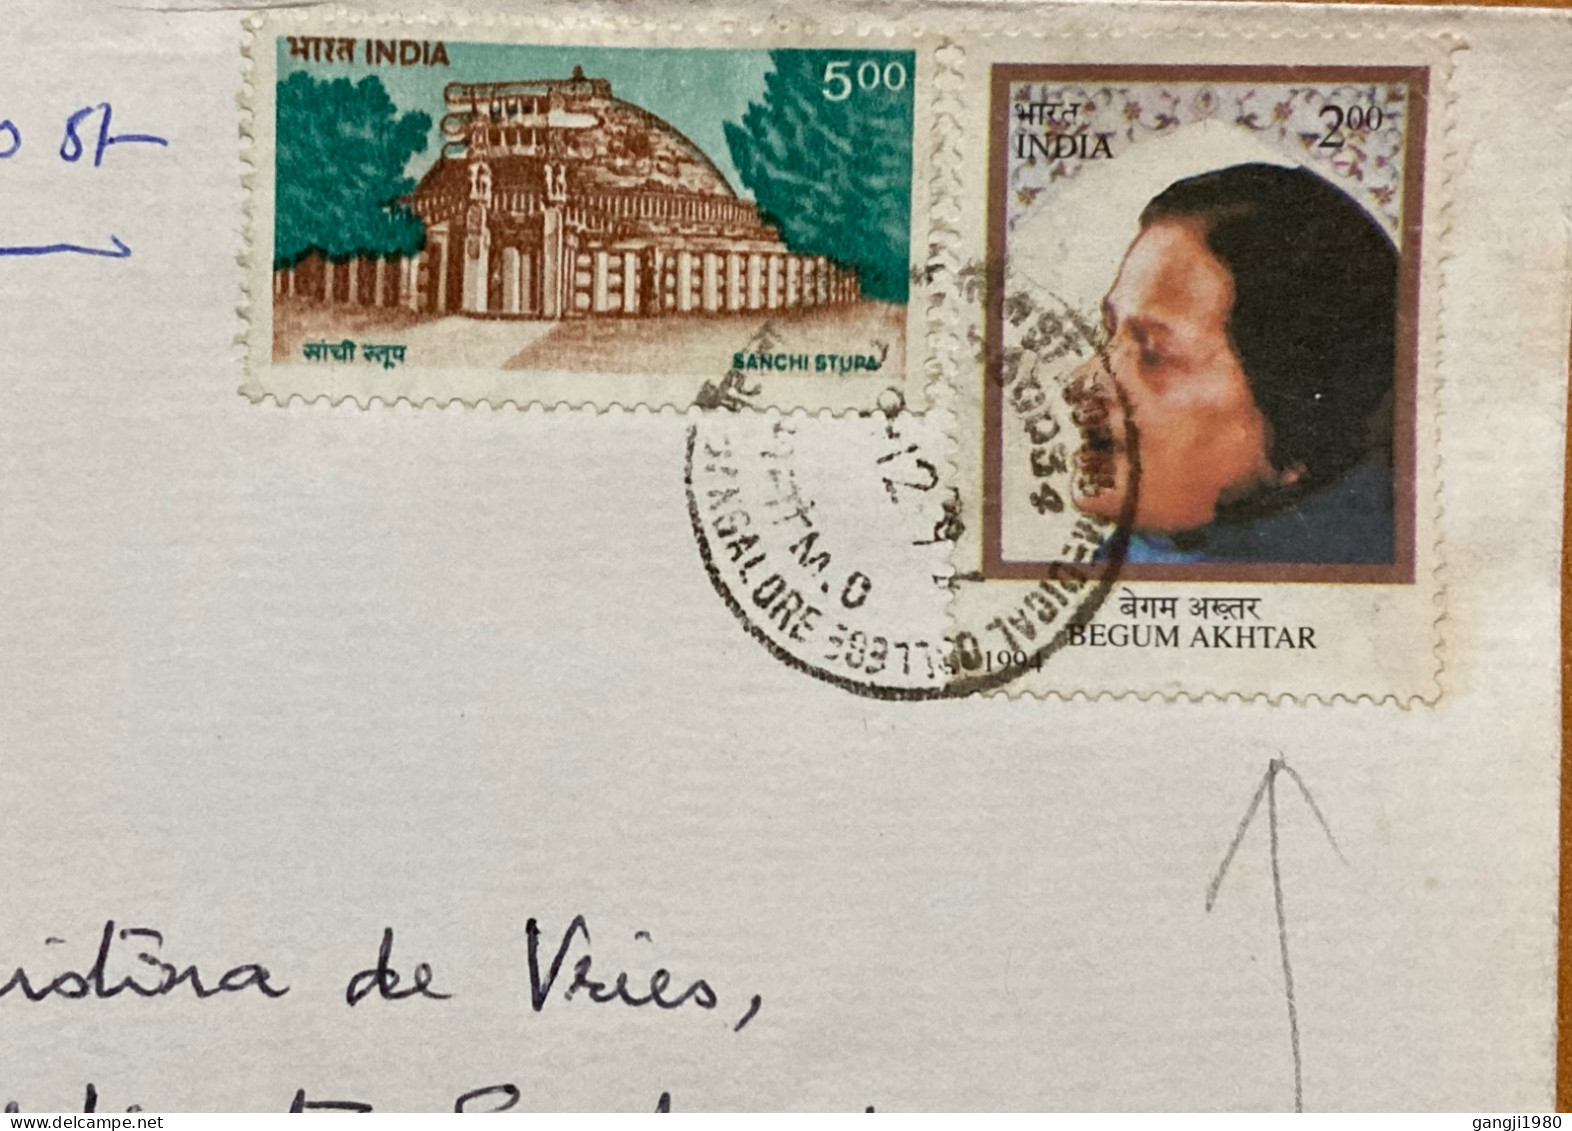 INDIA 1994, COVER USED TO NETHERLANDS, WITHDRAWN STAMP BEGUM AKHTAR, & SANCHI STUPA, RARE USE ON COVER, BANGALORE CITY C - Storia Postale